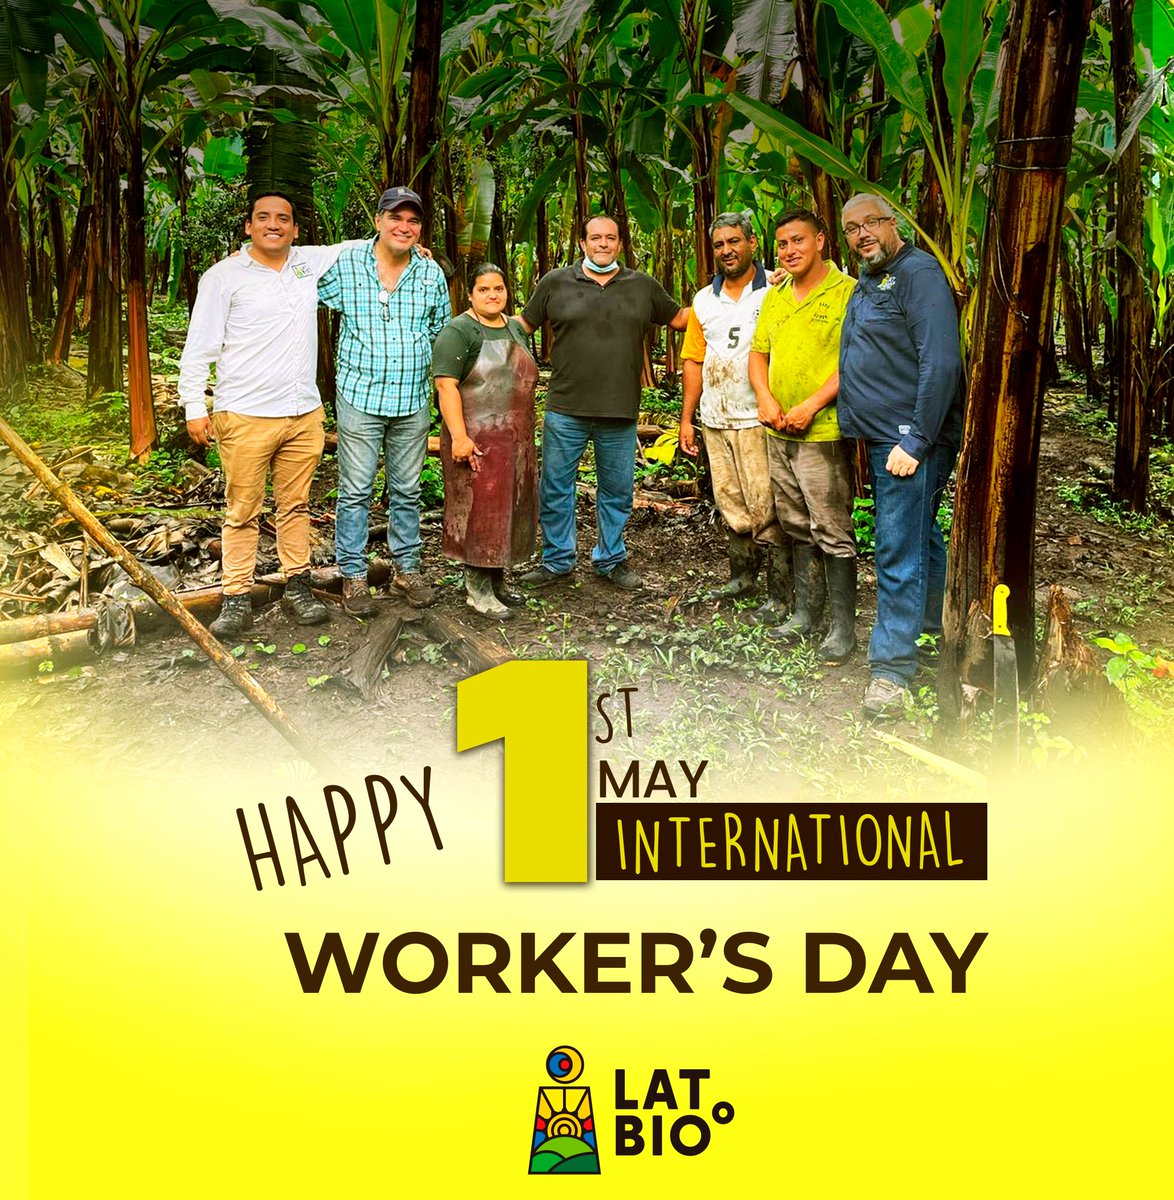 There is no small task, all small efforts add up to productivity. 👩‍🚀👨‍✈️👩‍🎨👨‍💻👨‍🔬👩‍💼👨‍🍳👨‍🌾👩‍⚕️
🎉Happy worker's day🎉
#latbio #ecuador🇪🇨 #biodynamicagriculture #WorkersDay2022